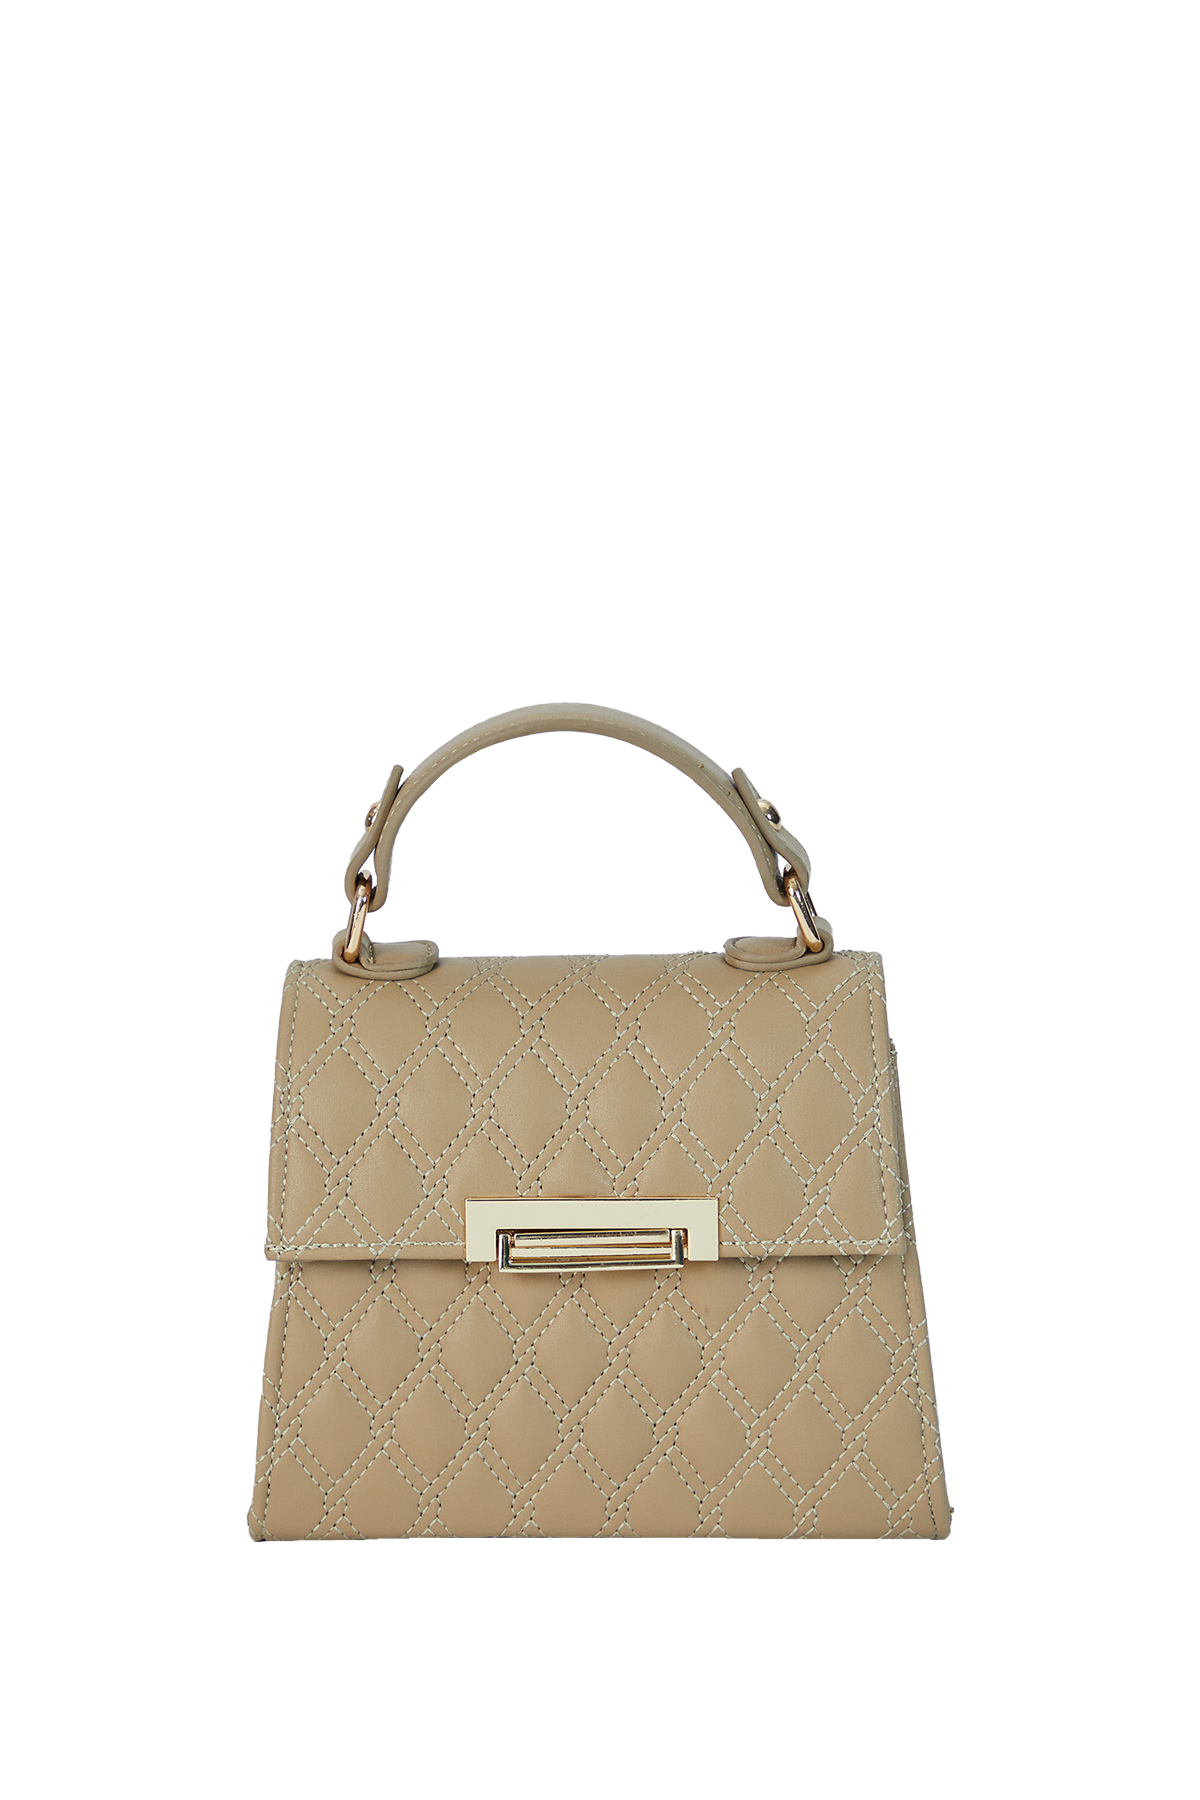 Recycled Vegan Leather Hand Bag - Beige